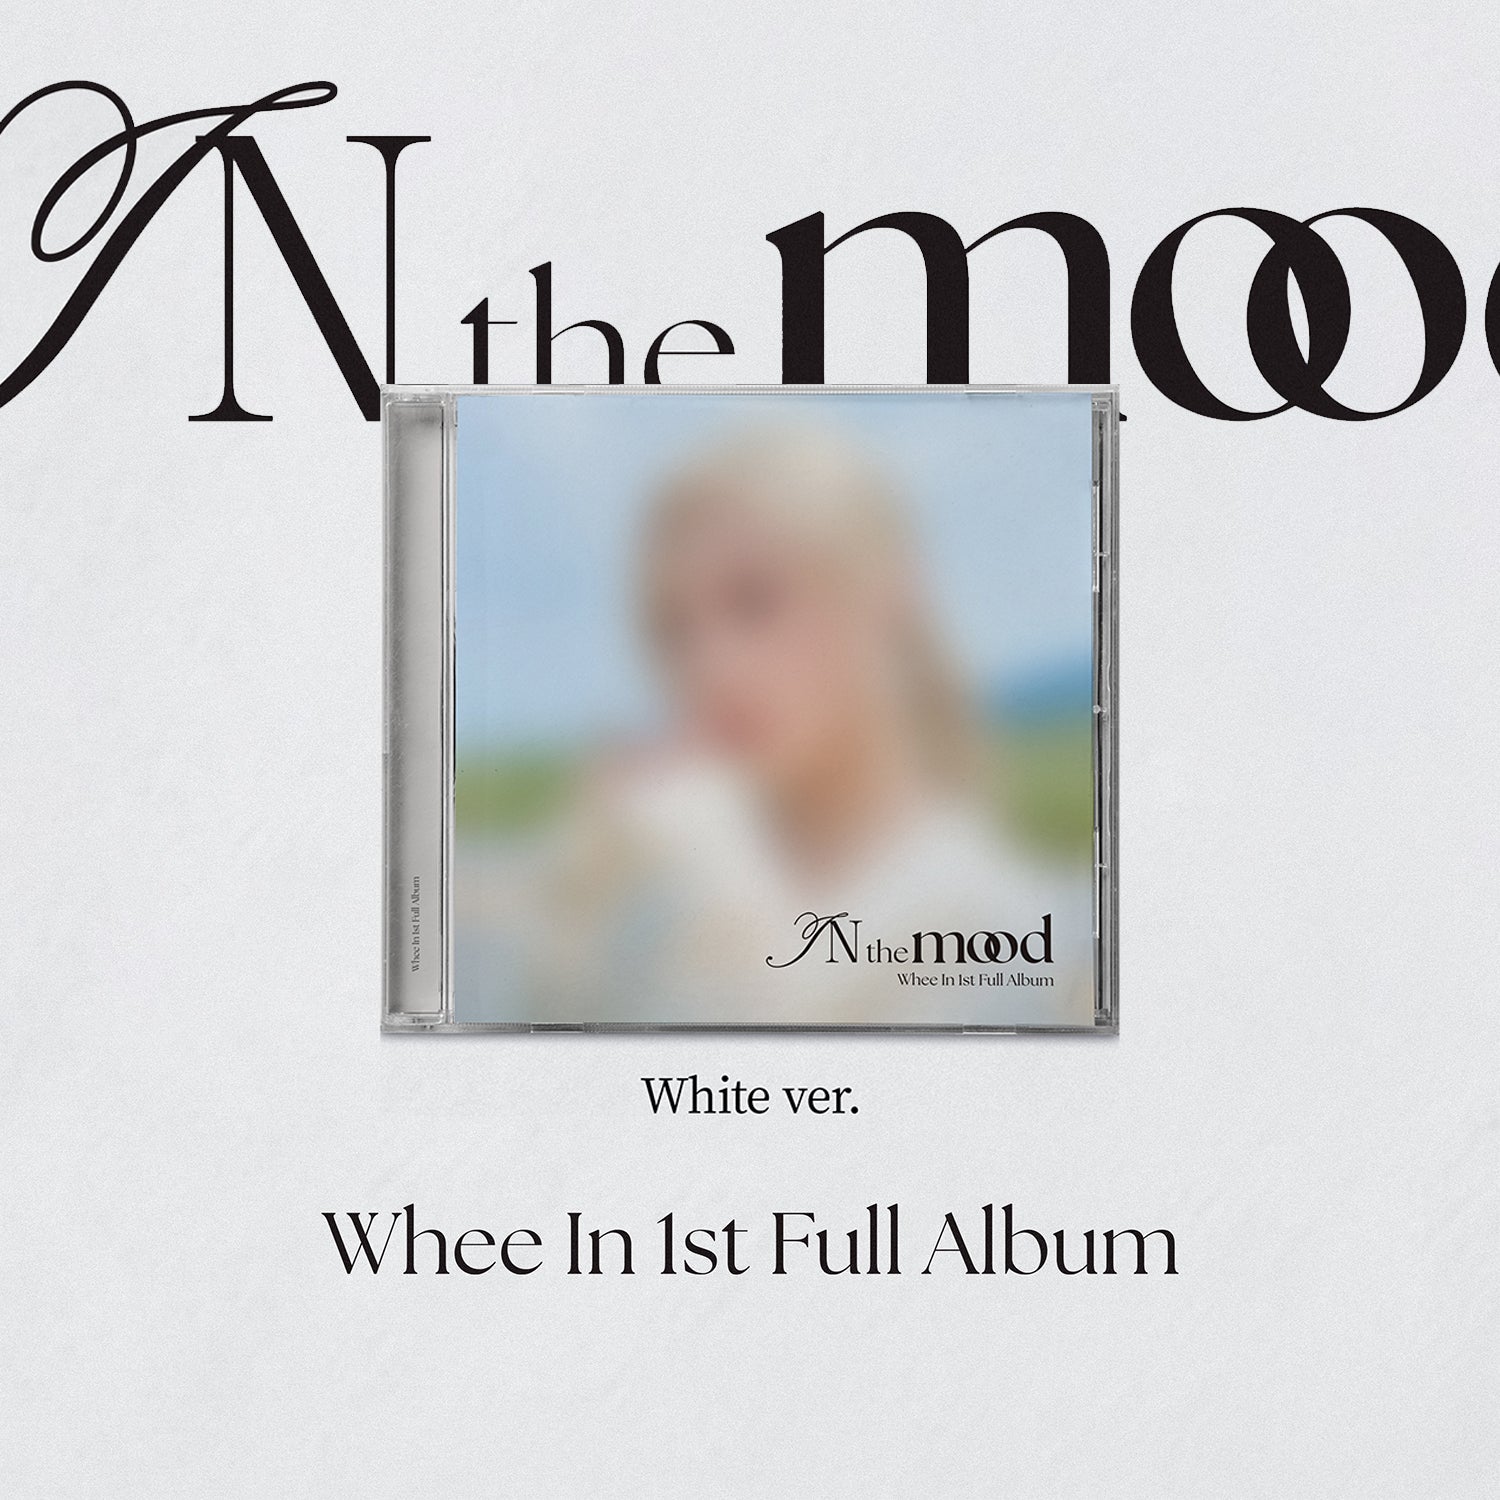 WHEE IN 1ST FULL ALBUM 'IN THE MOOD' (JEWEL) WHITE VERSION COVER